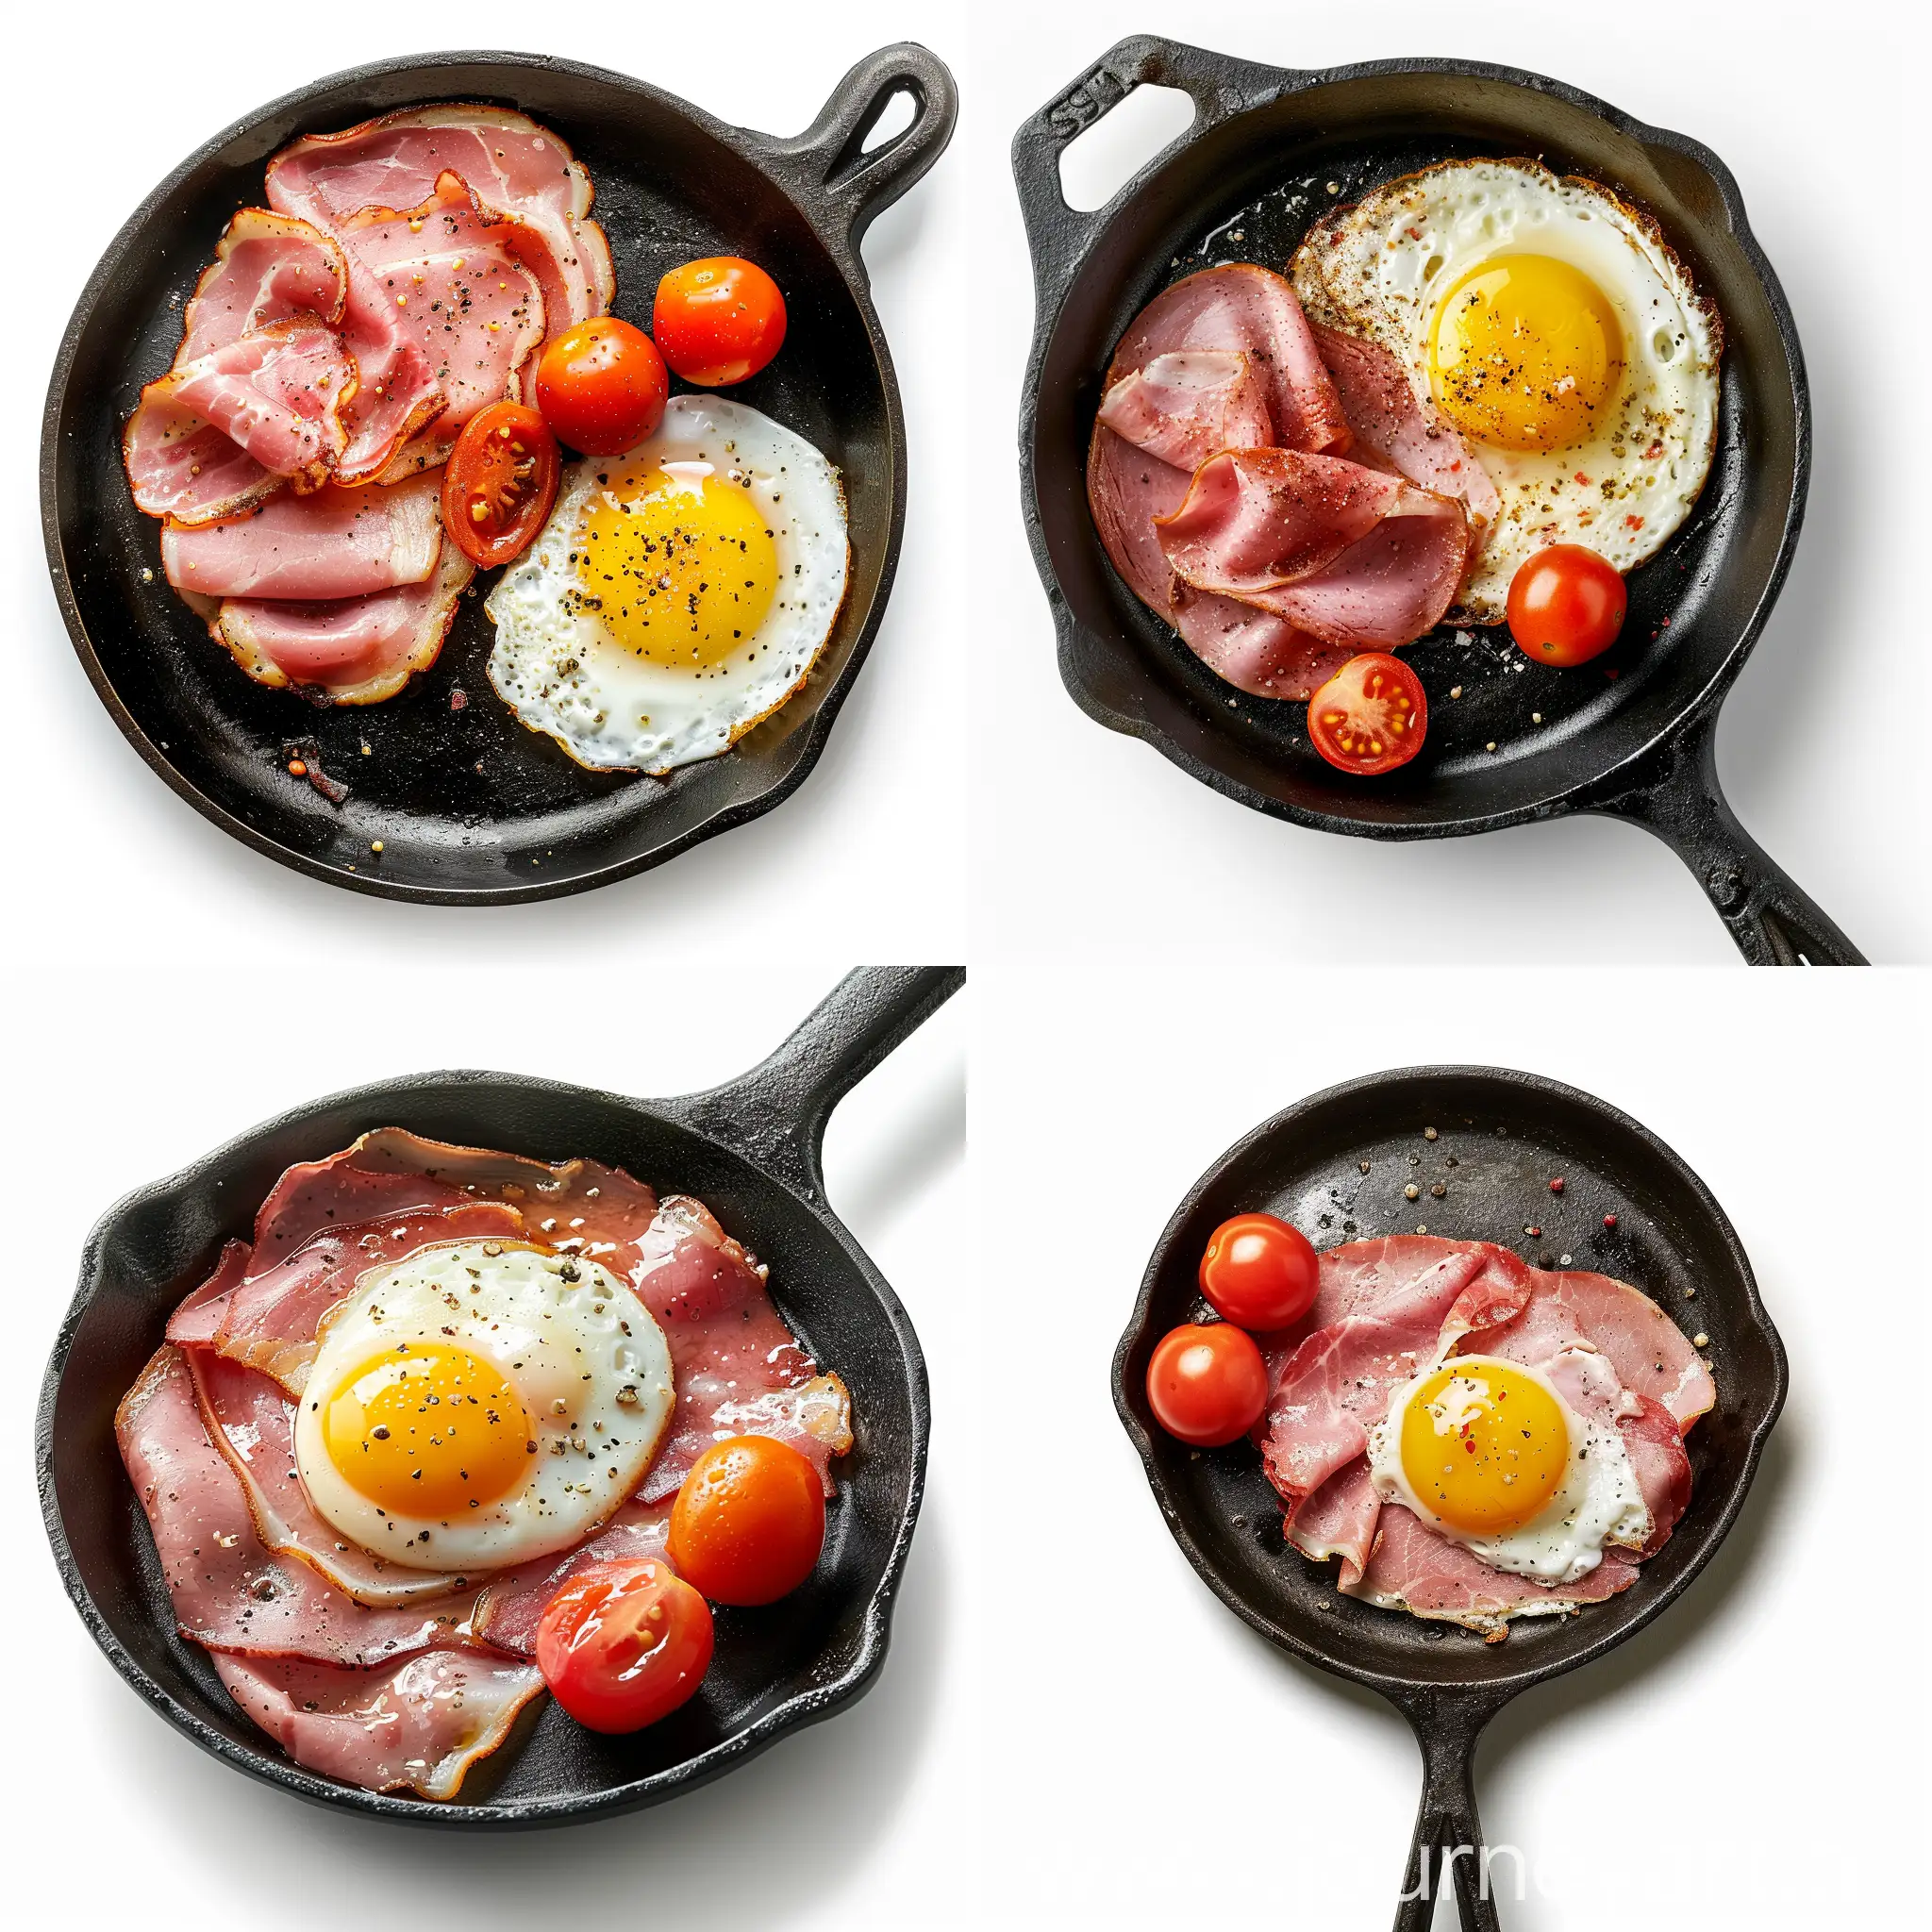 Delicious-Fried-Egg-and-Ham-Slices-on-Iron-Skillet-with-Cherry-Tomatoes